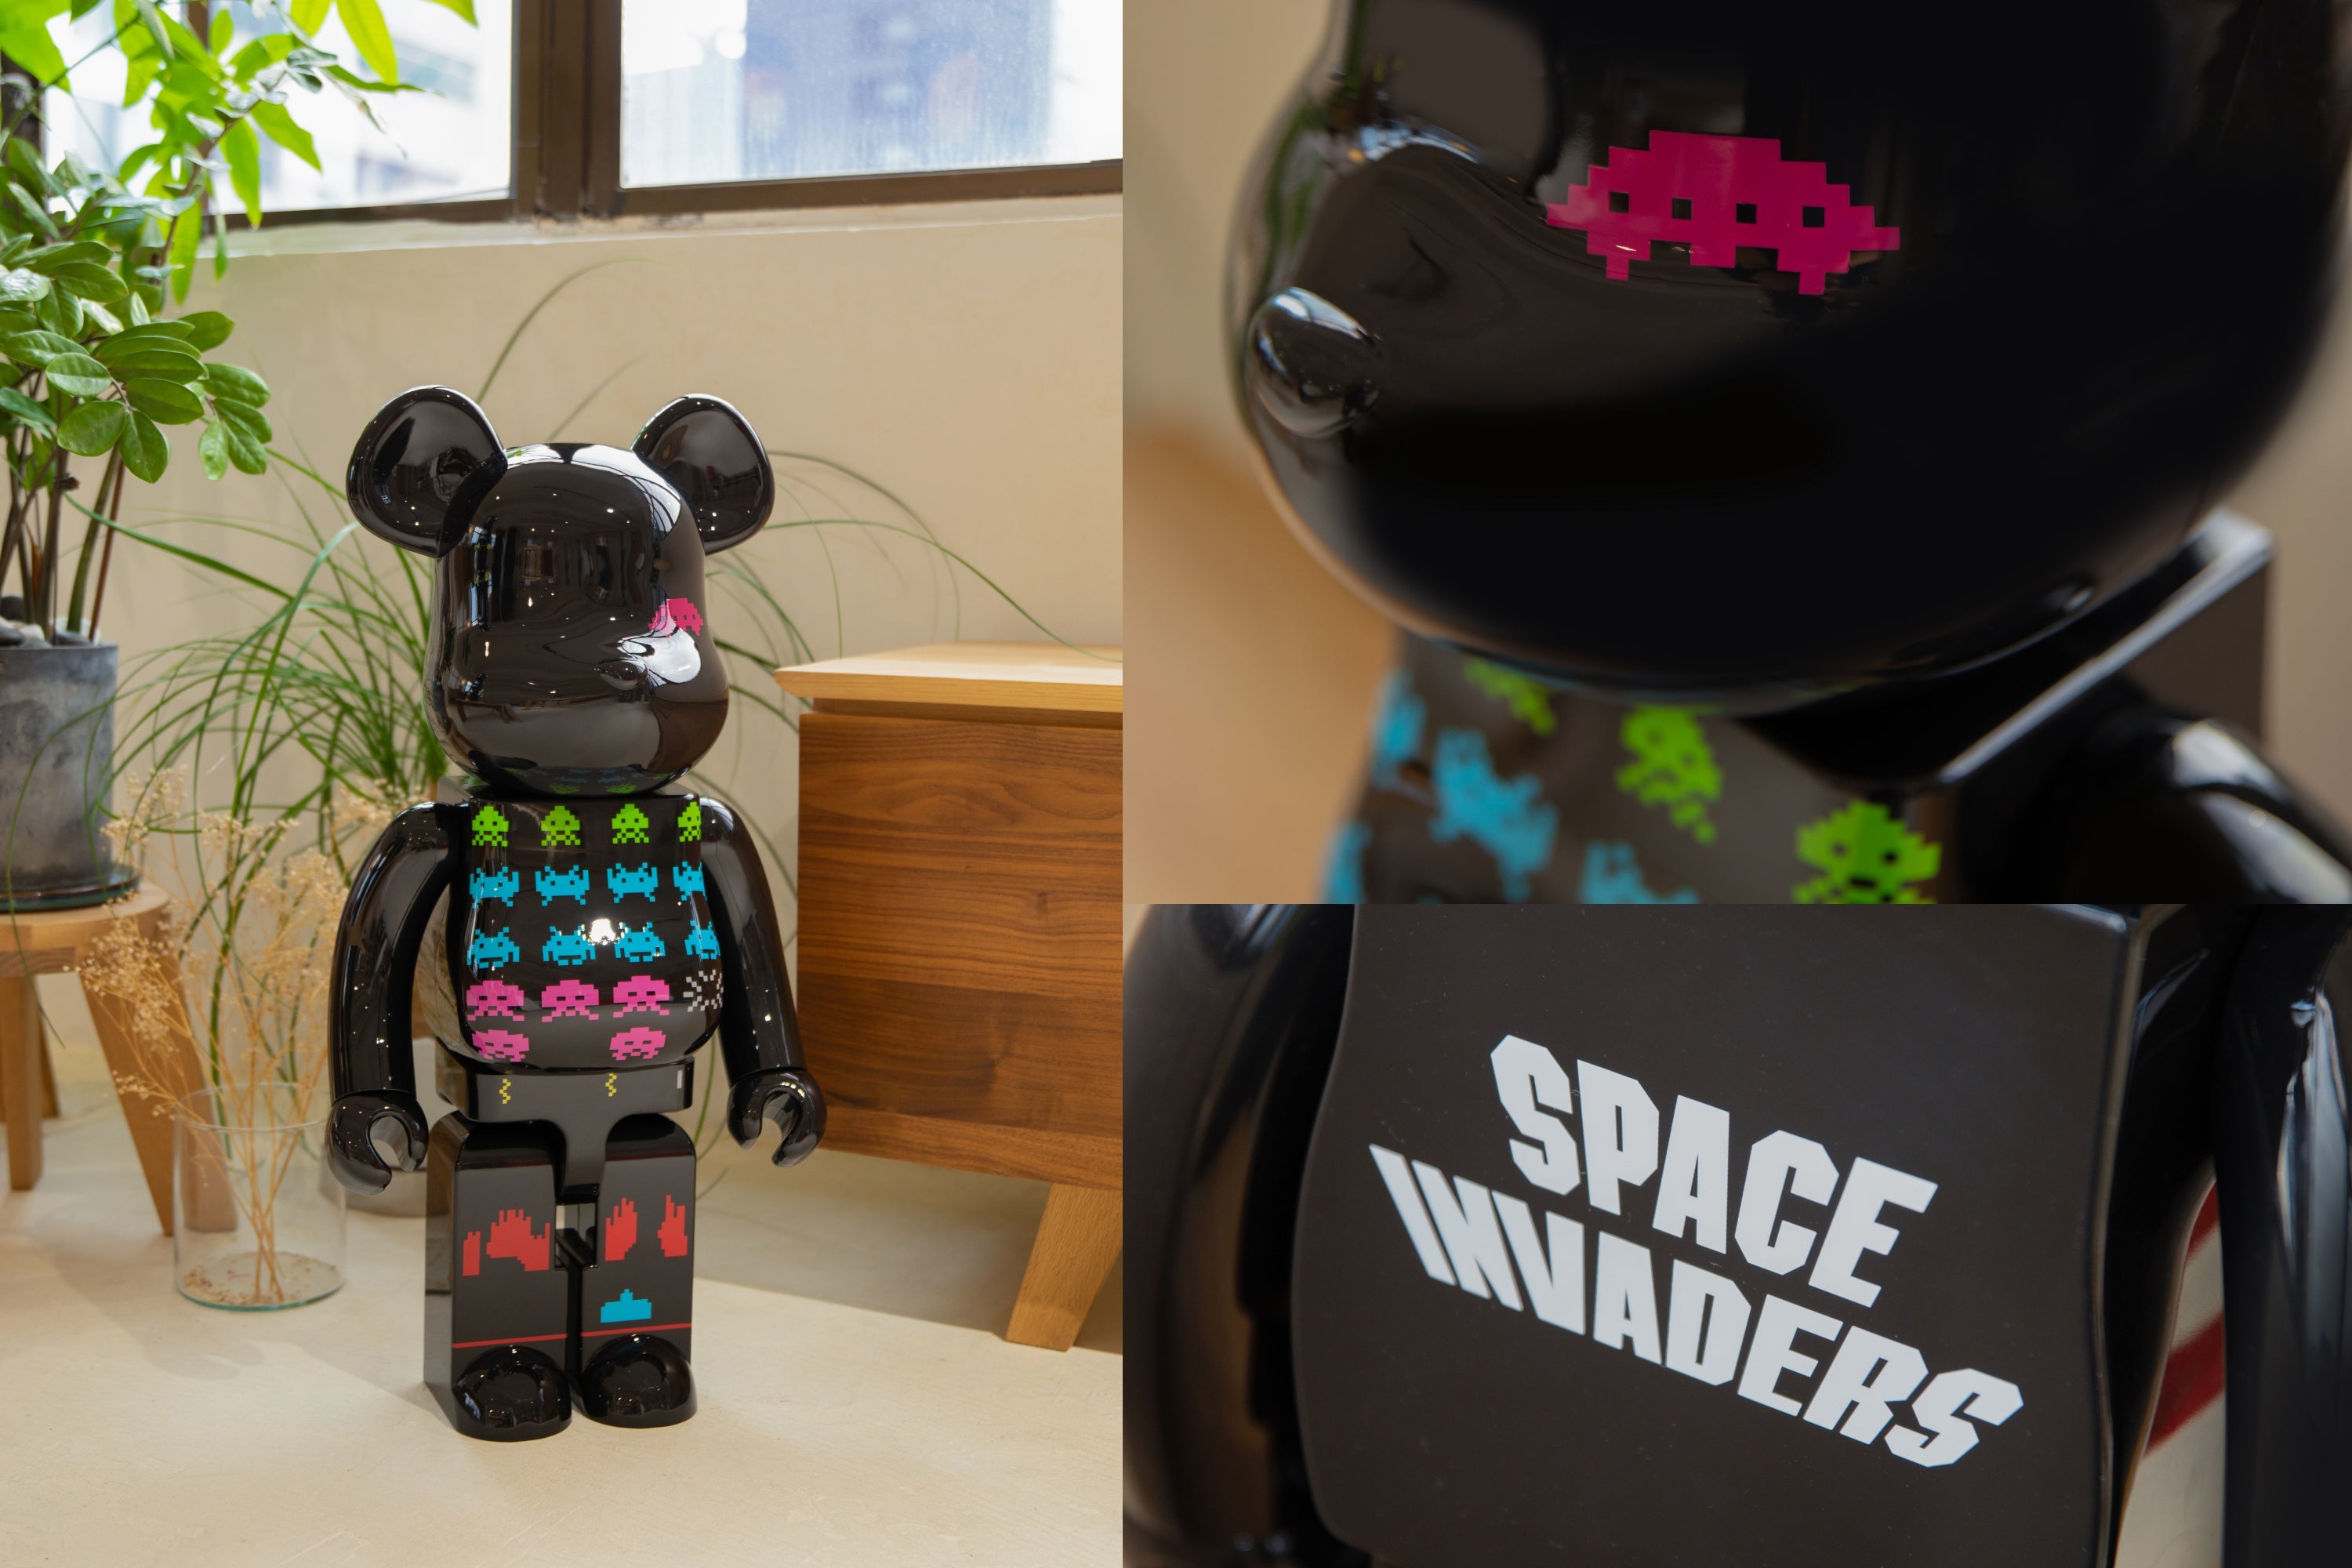 From Pac-Man to Pink Panther, awaken your inner child with this latest BE@RBRICK drop